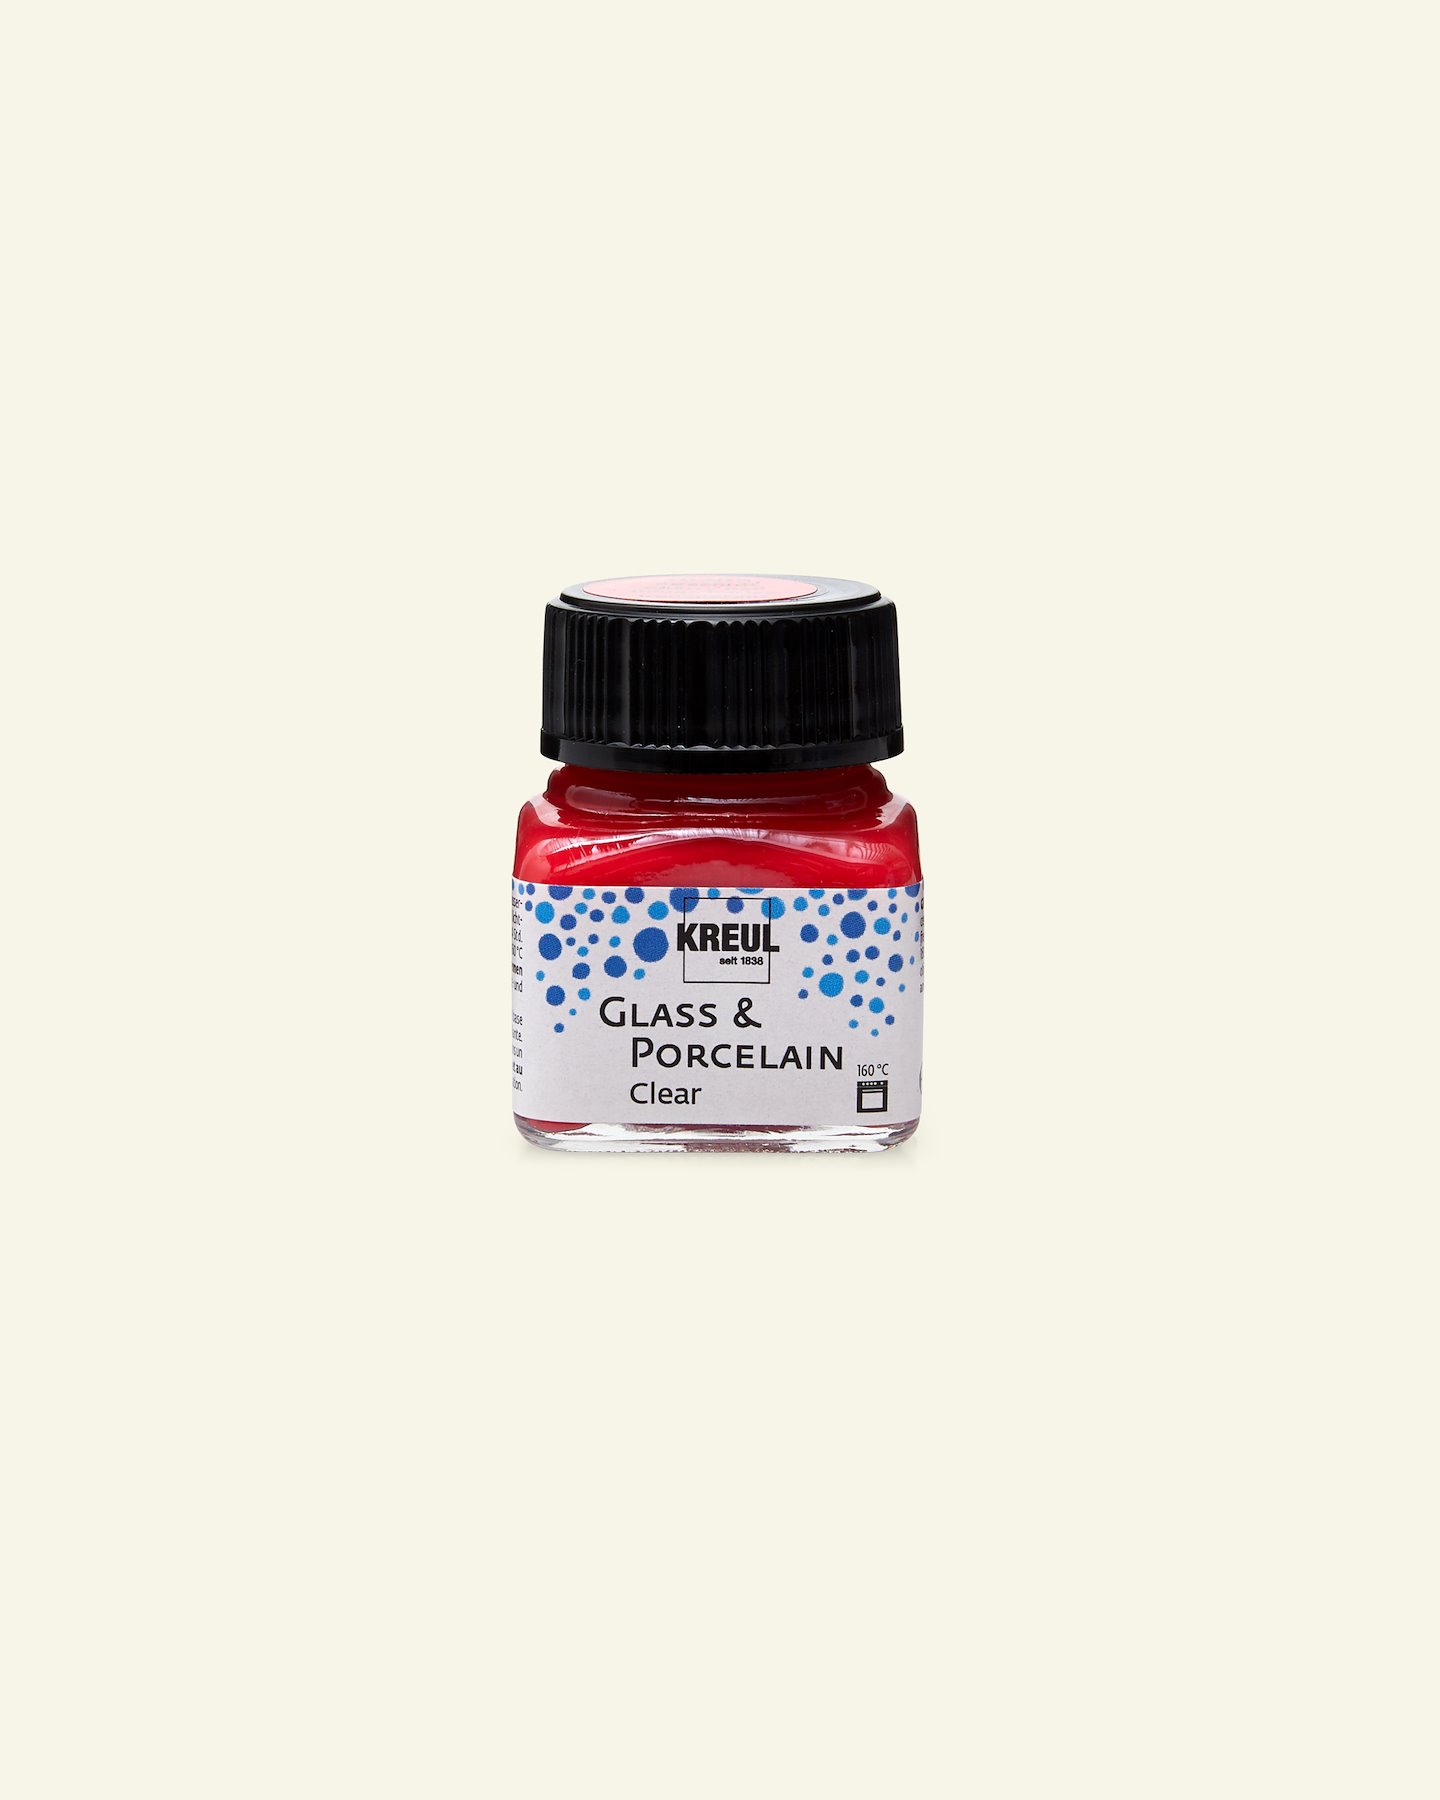 Glass&porcel. paint clear 20ml cherryred 31282_pack